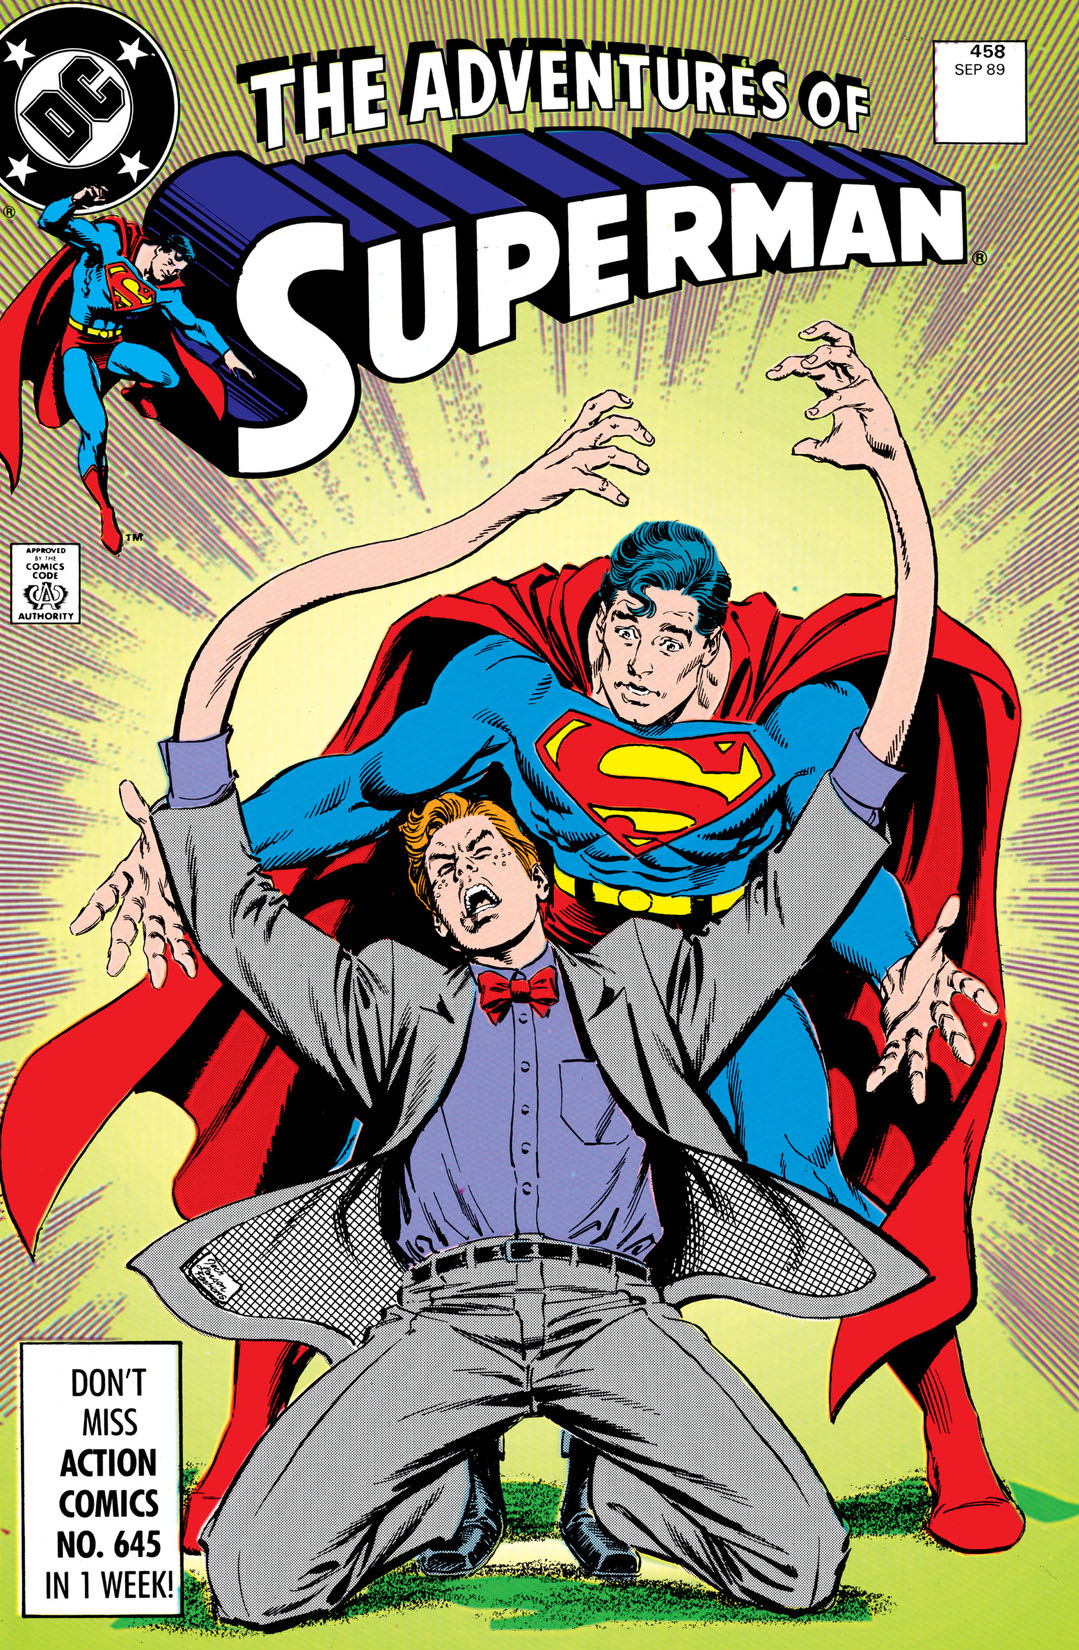 Adventures of Superman (1987-2006) #458 preview images